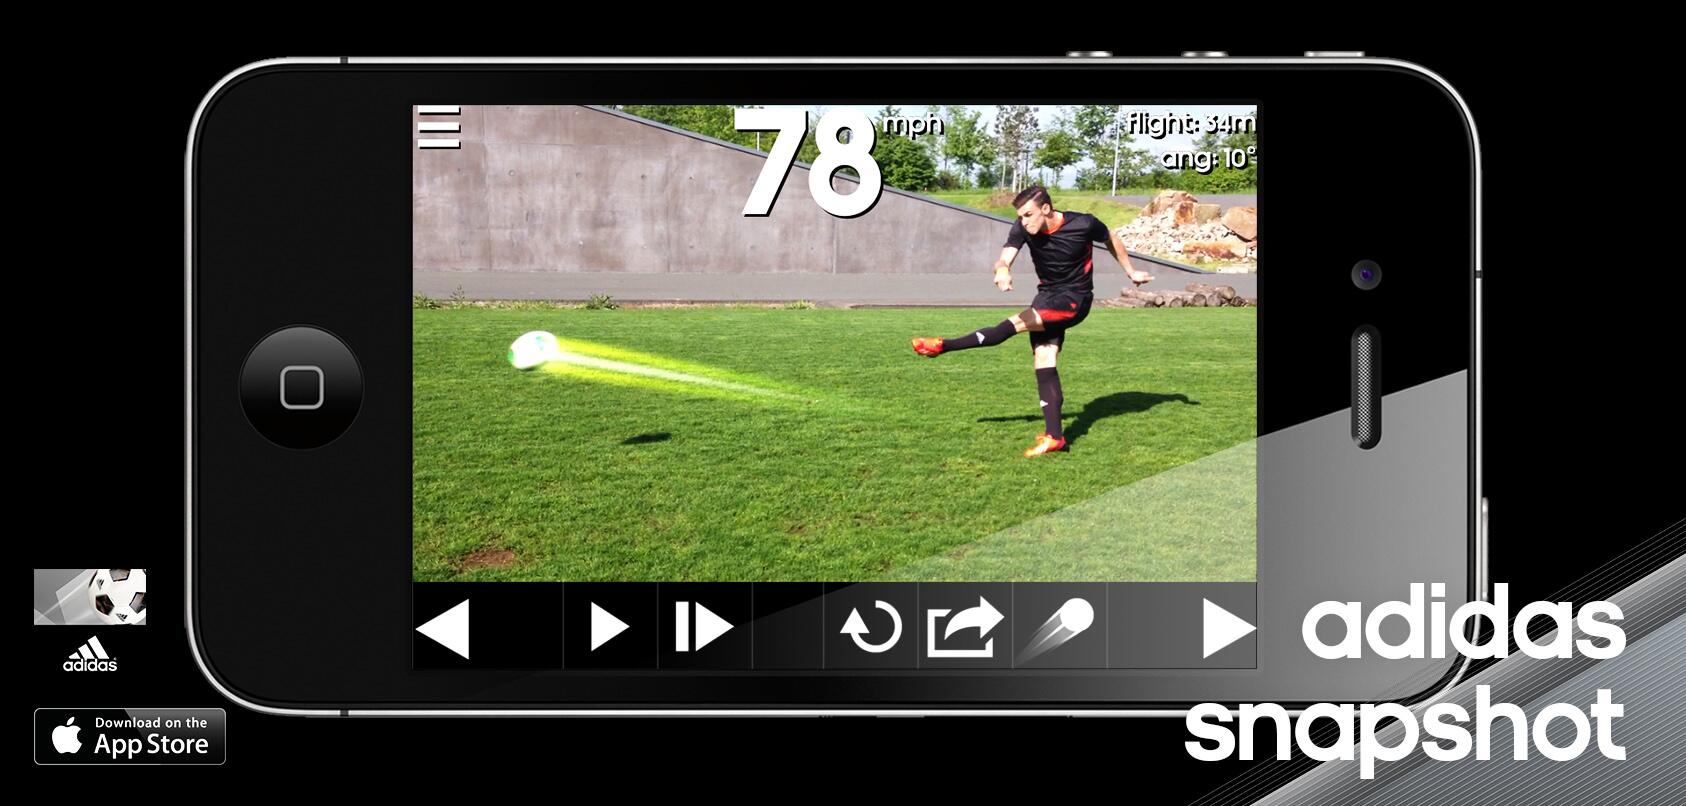 ensillar un poco pompa adidas Football on Twitter: "Shoot with power and test yourself against  @GarethBale11. Download the adidas Snapshot app at http://t.co/eQh6YnBtpe  http://t.co/wPTJXecj48" / Twitter